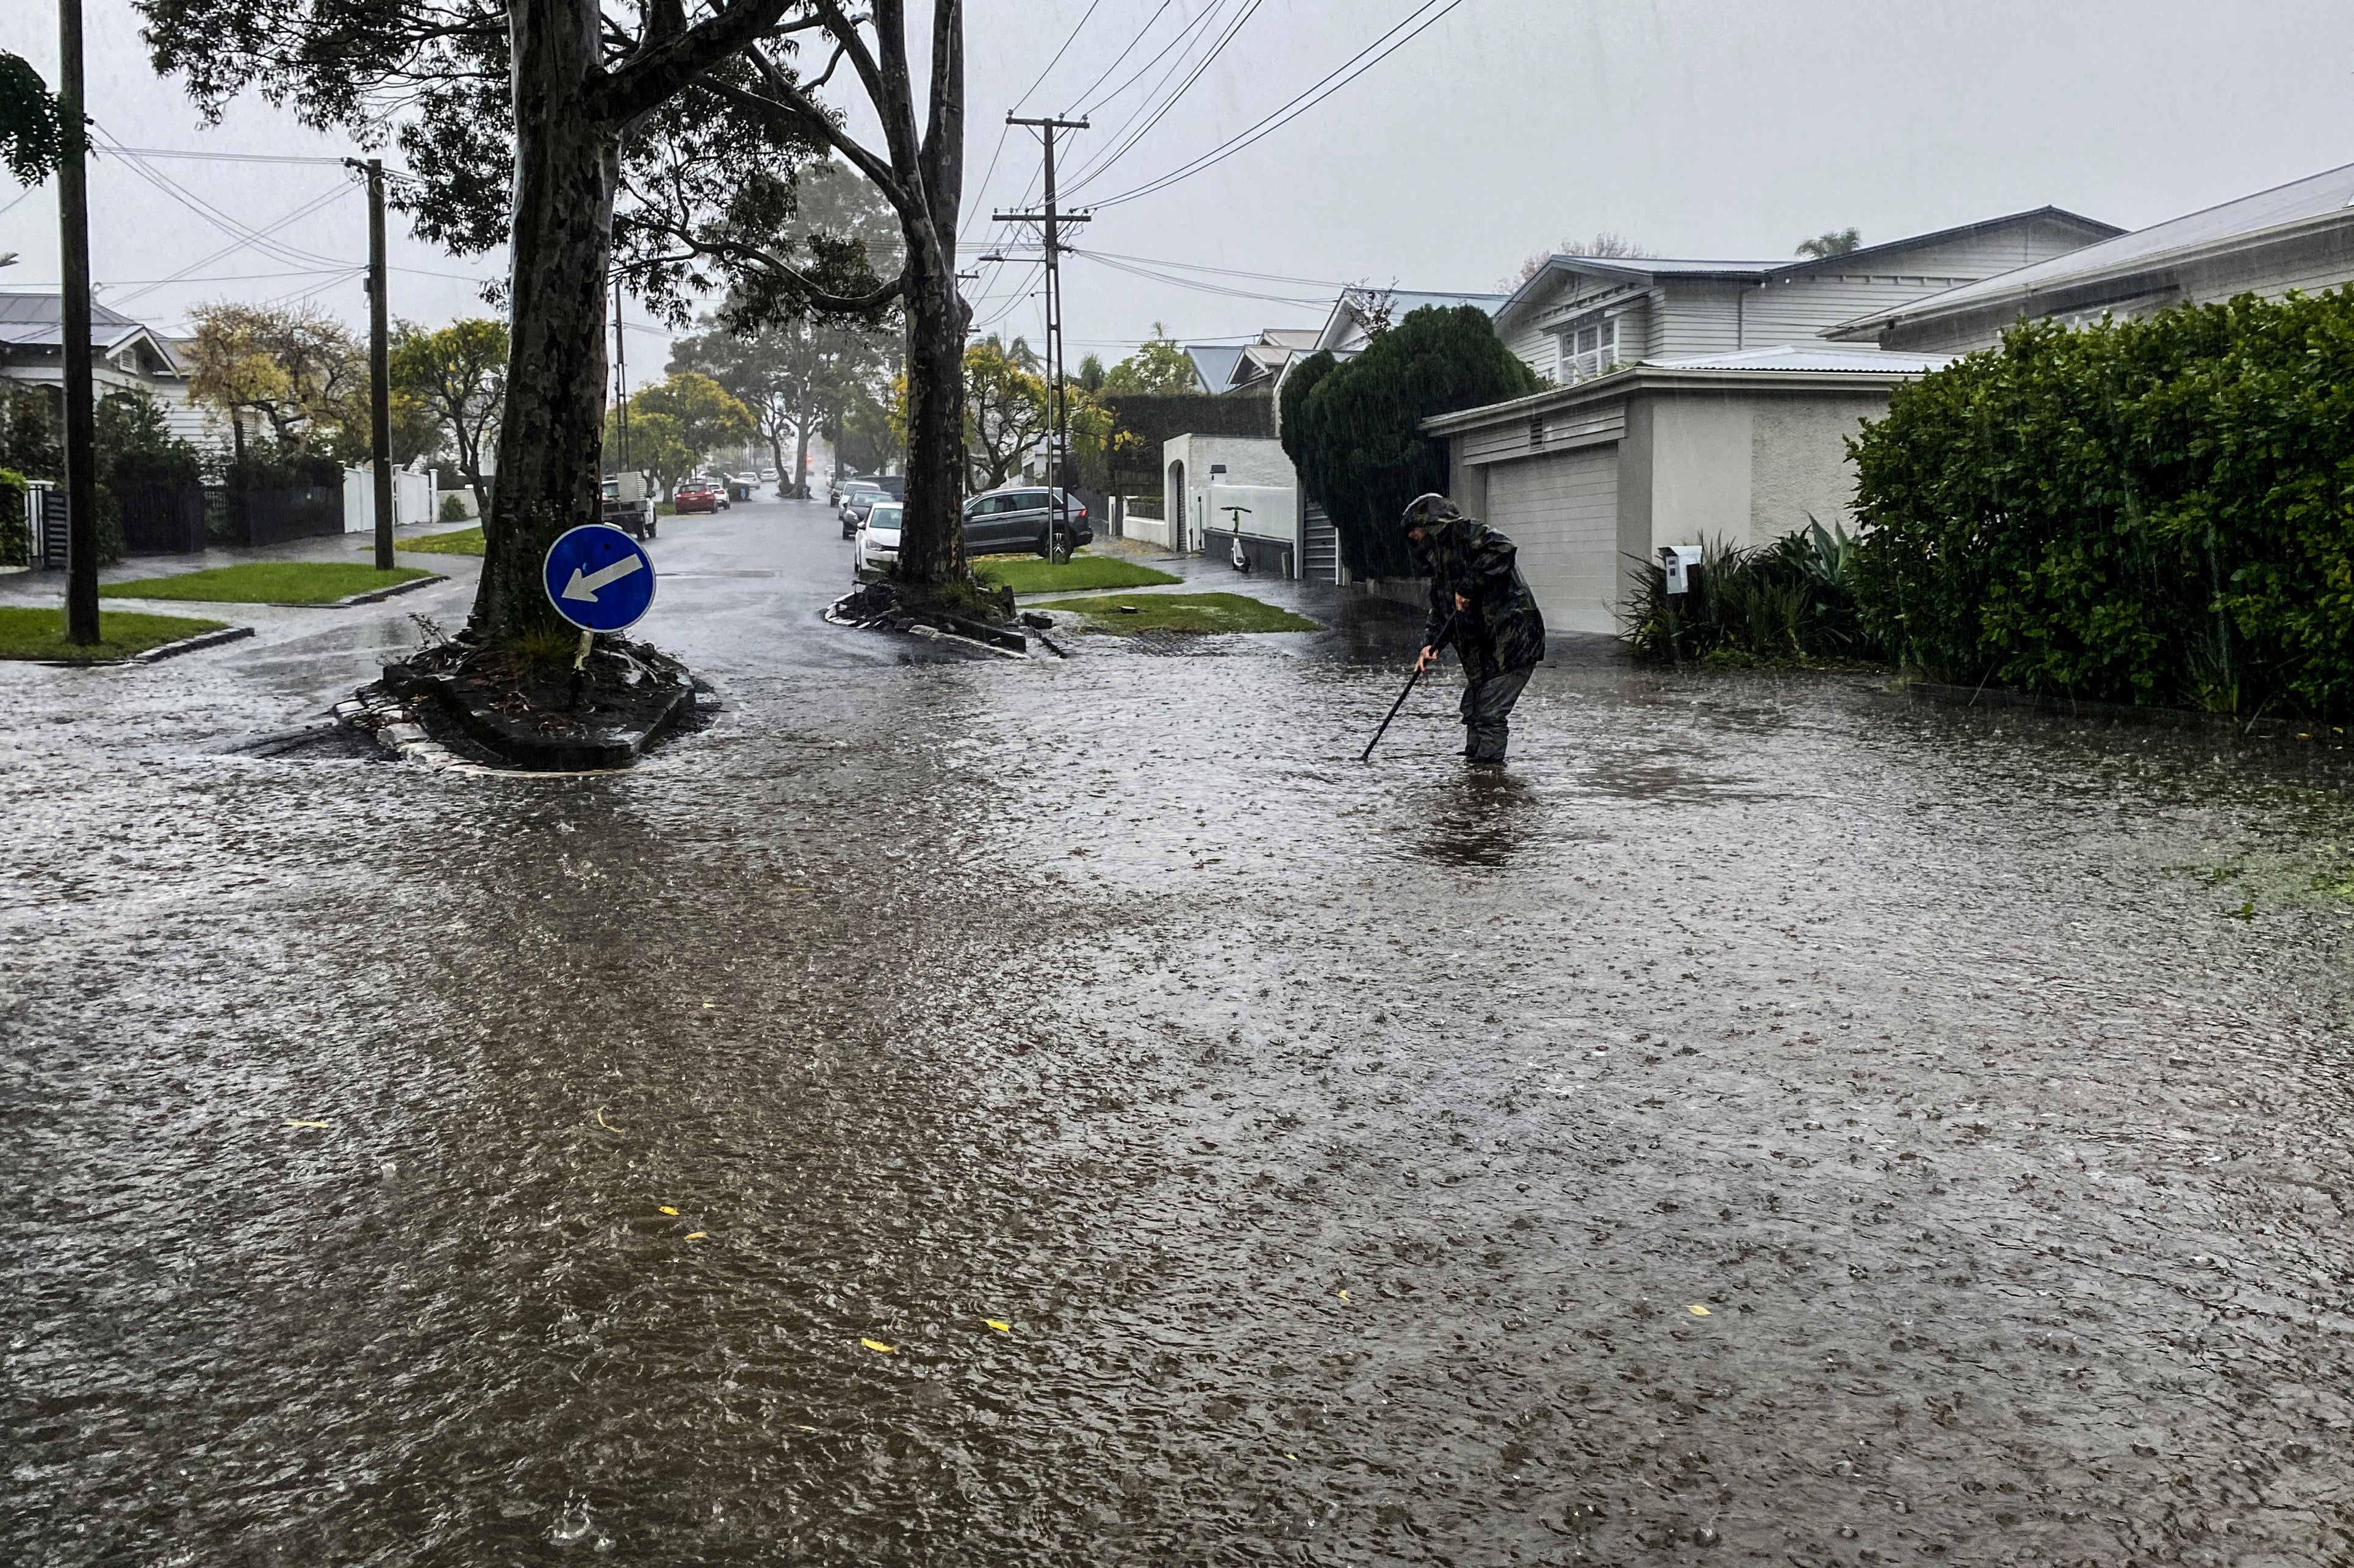 A man attempts to clear a drain in a flooded street in central Auckland, New Zealand